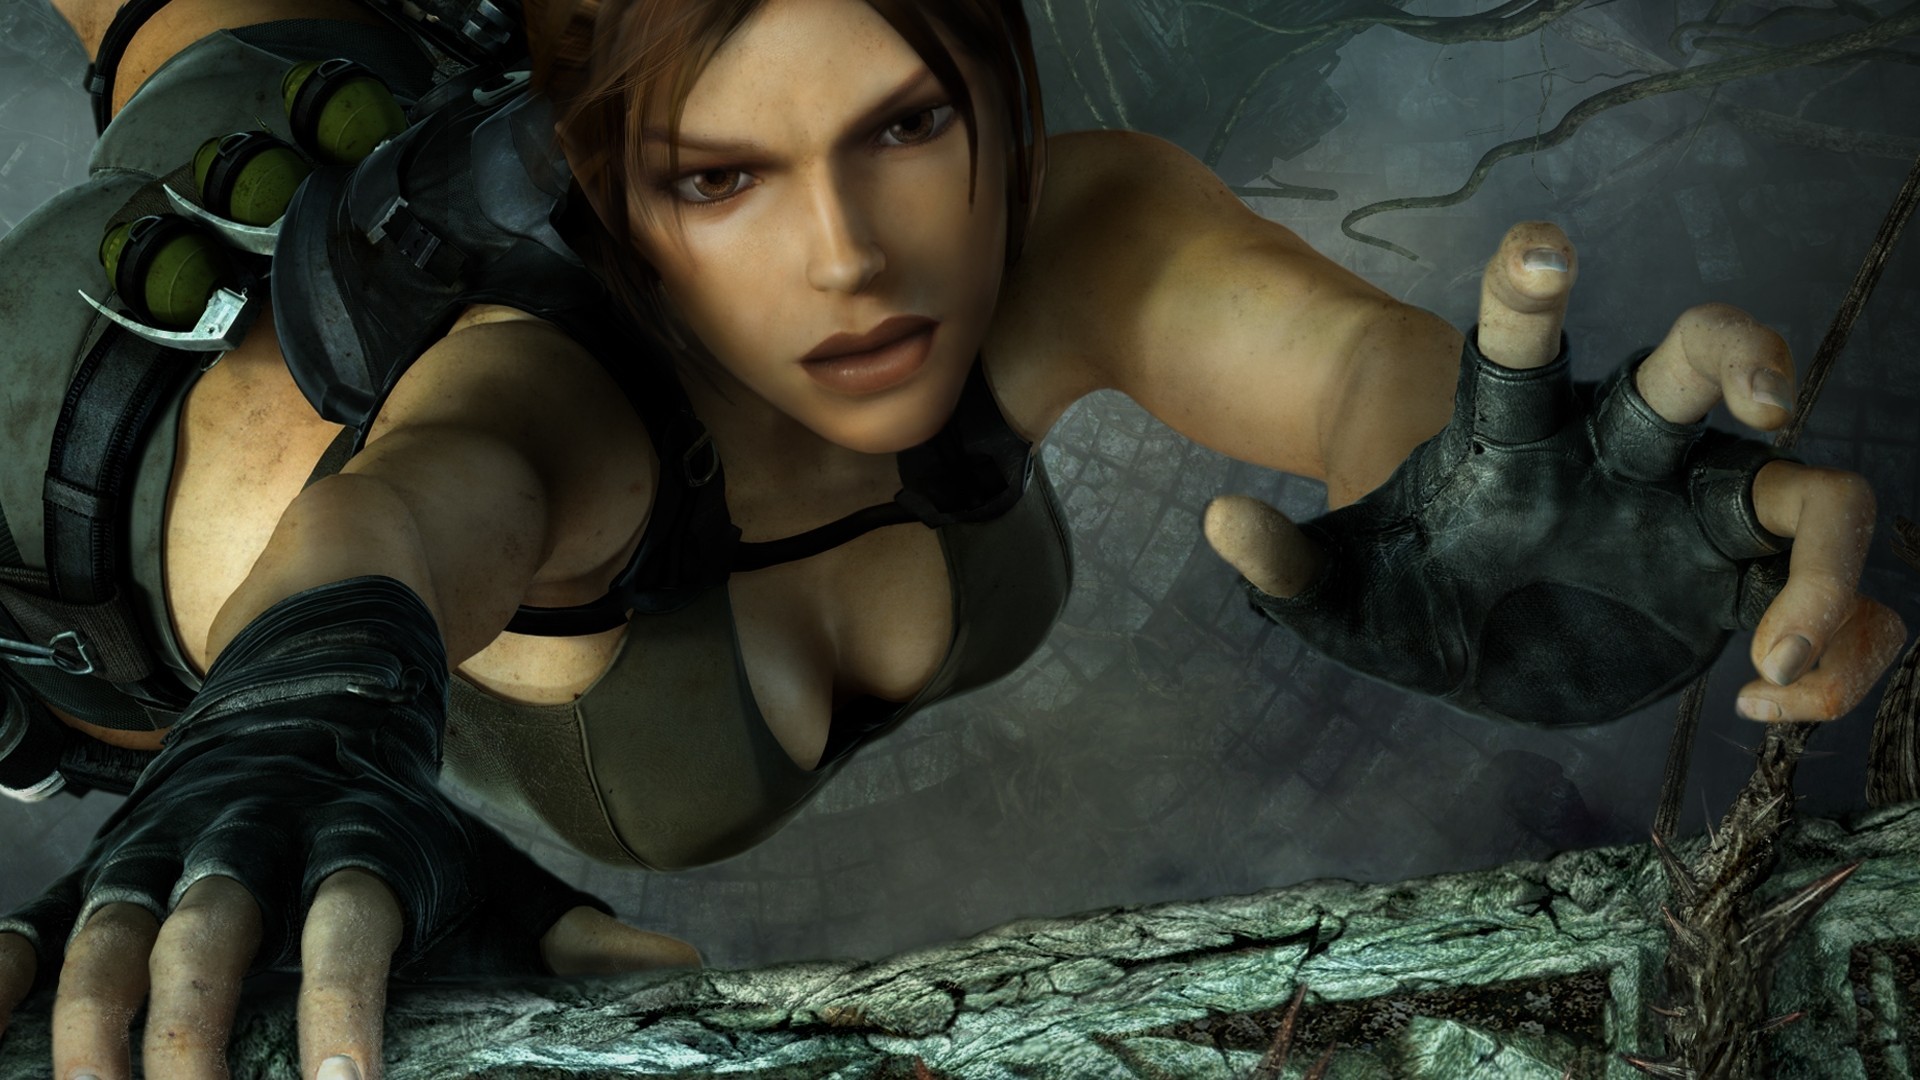 General 1920x1080 Tomb Raider video games boobs cleavage video game art Lara Croft (Tomb Raider) video game girls video game characters